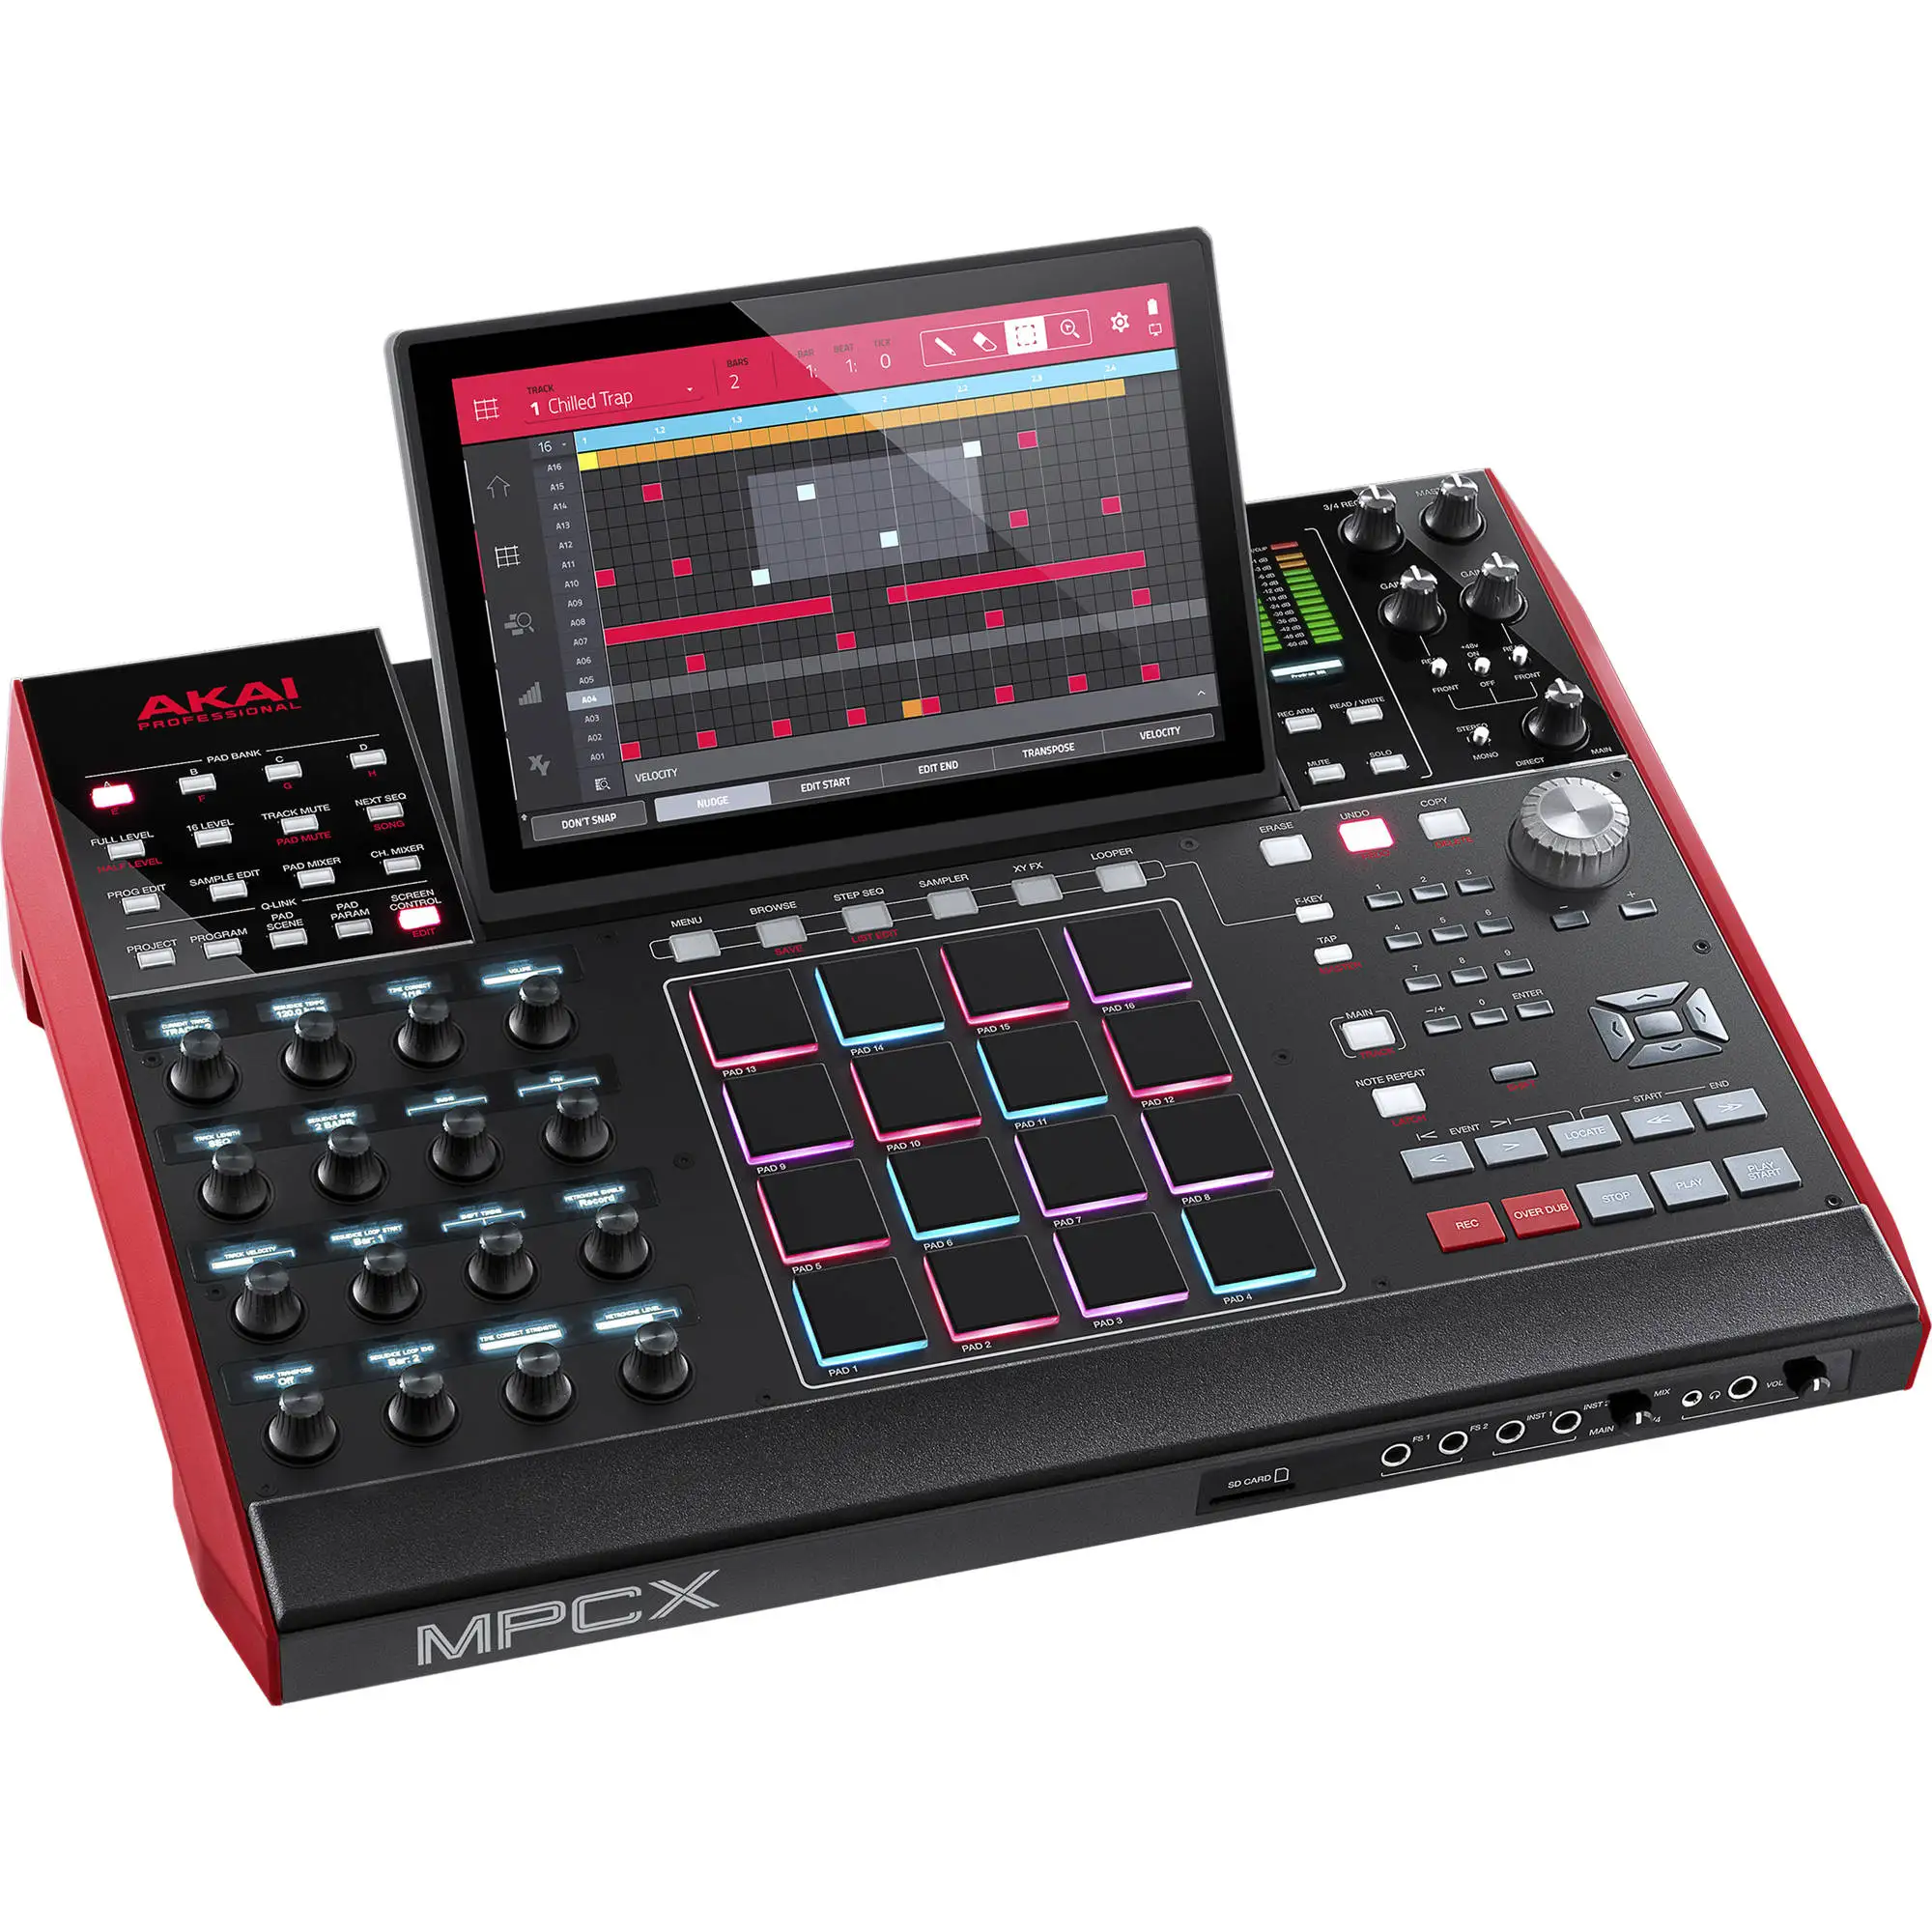 

(NEW NEW) AKAI Professional MPC X Standalone Drum Machine and Sampler With 10.1-inch display, Pads, Synth Engines and CV Ga